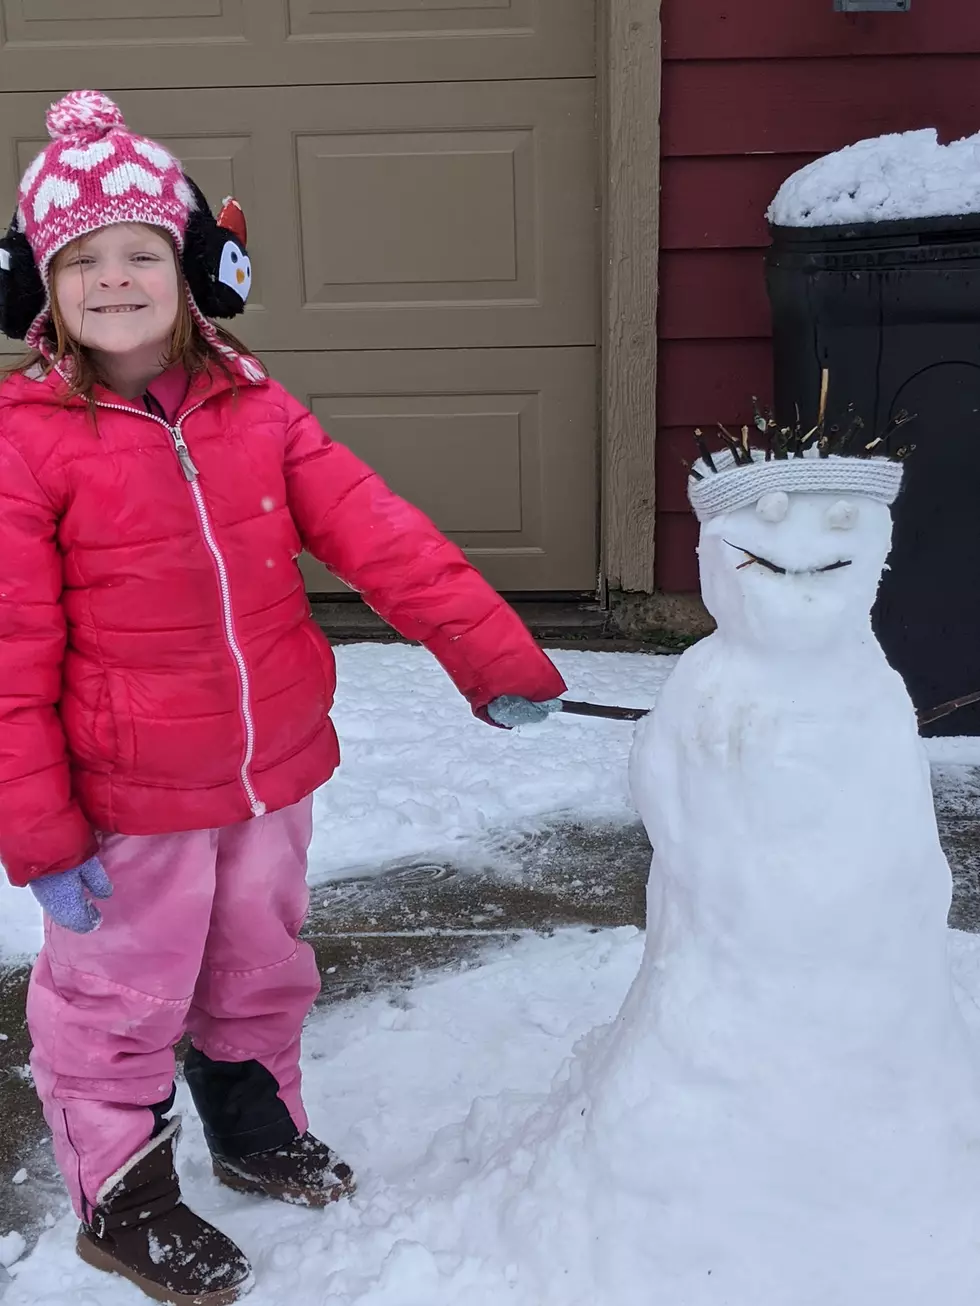 MaSNOWmes Takes Top Prize In Snowman Contest